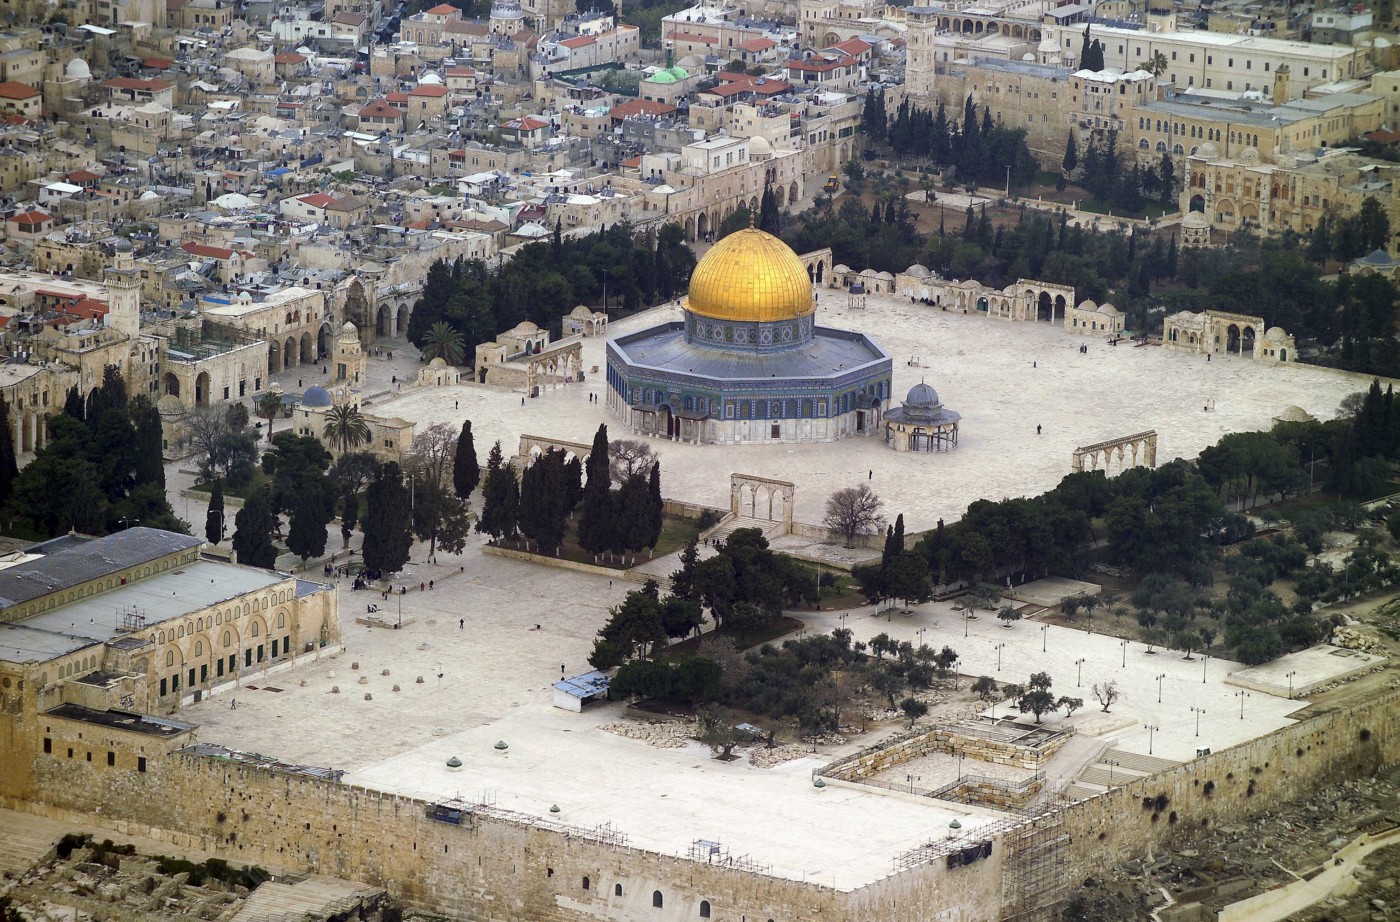 The Dome of the Rock on the Temple Mount site.